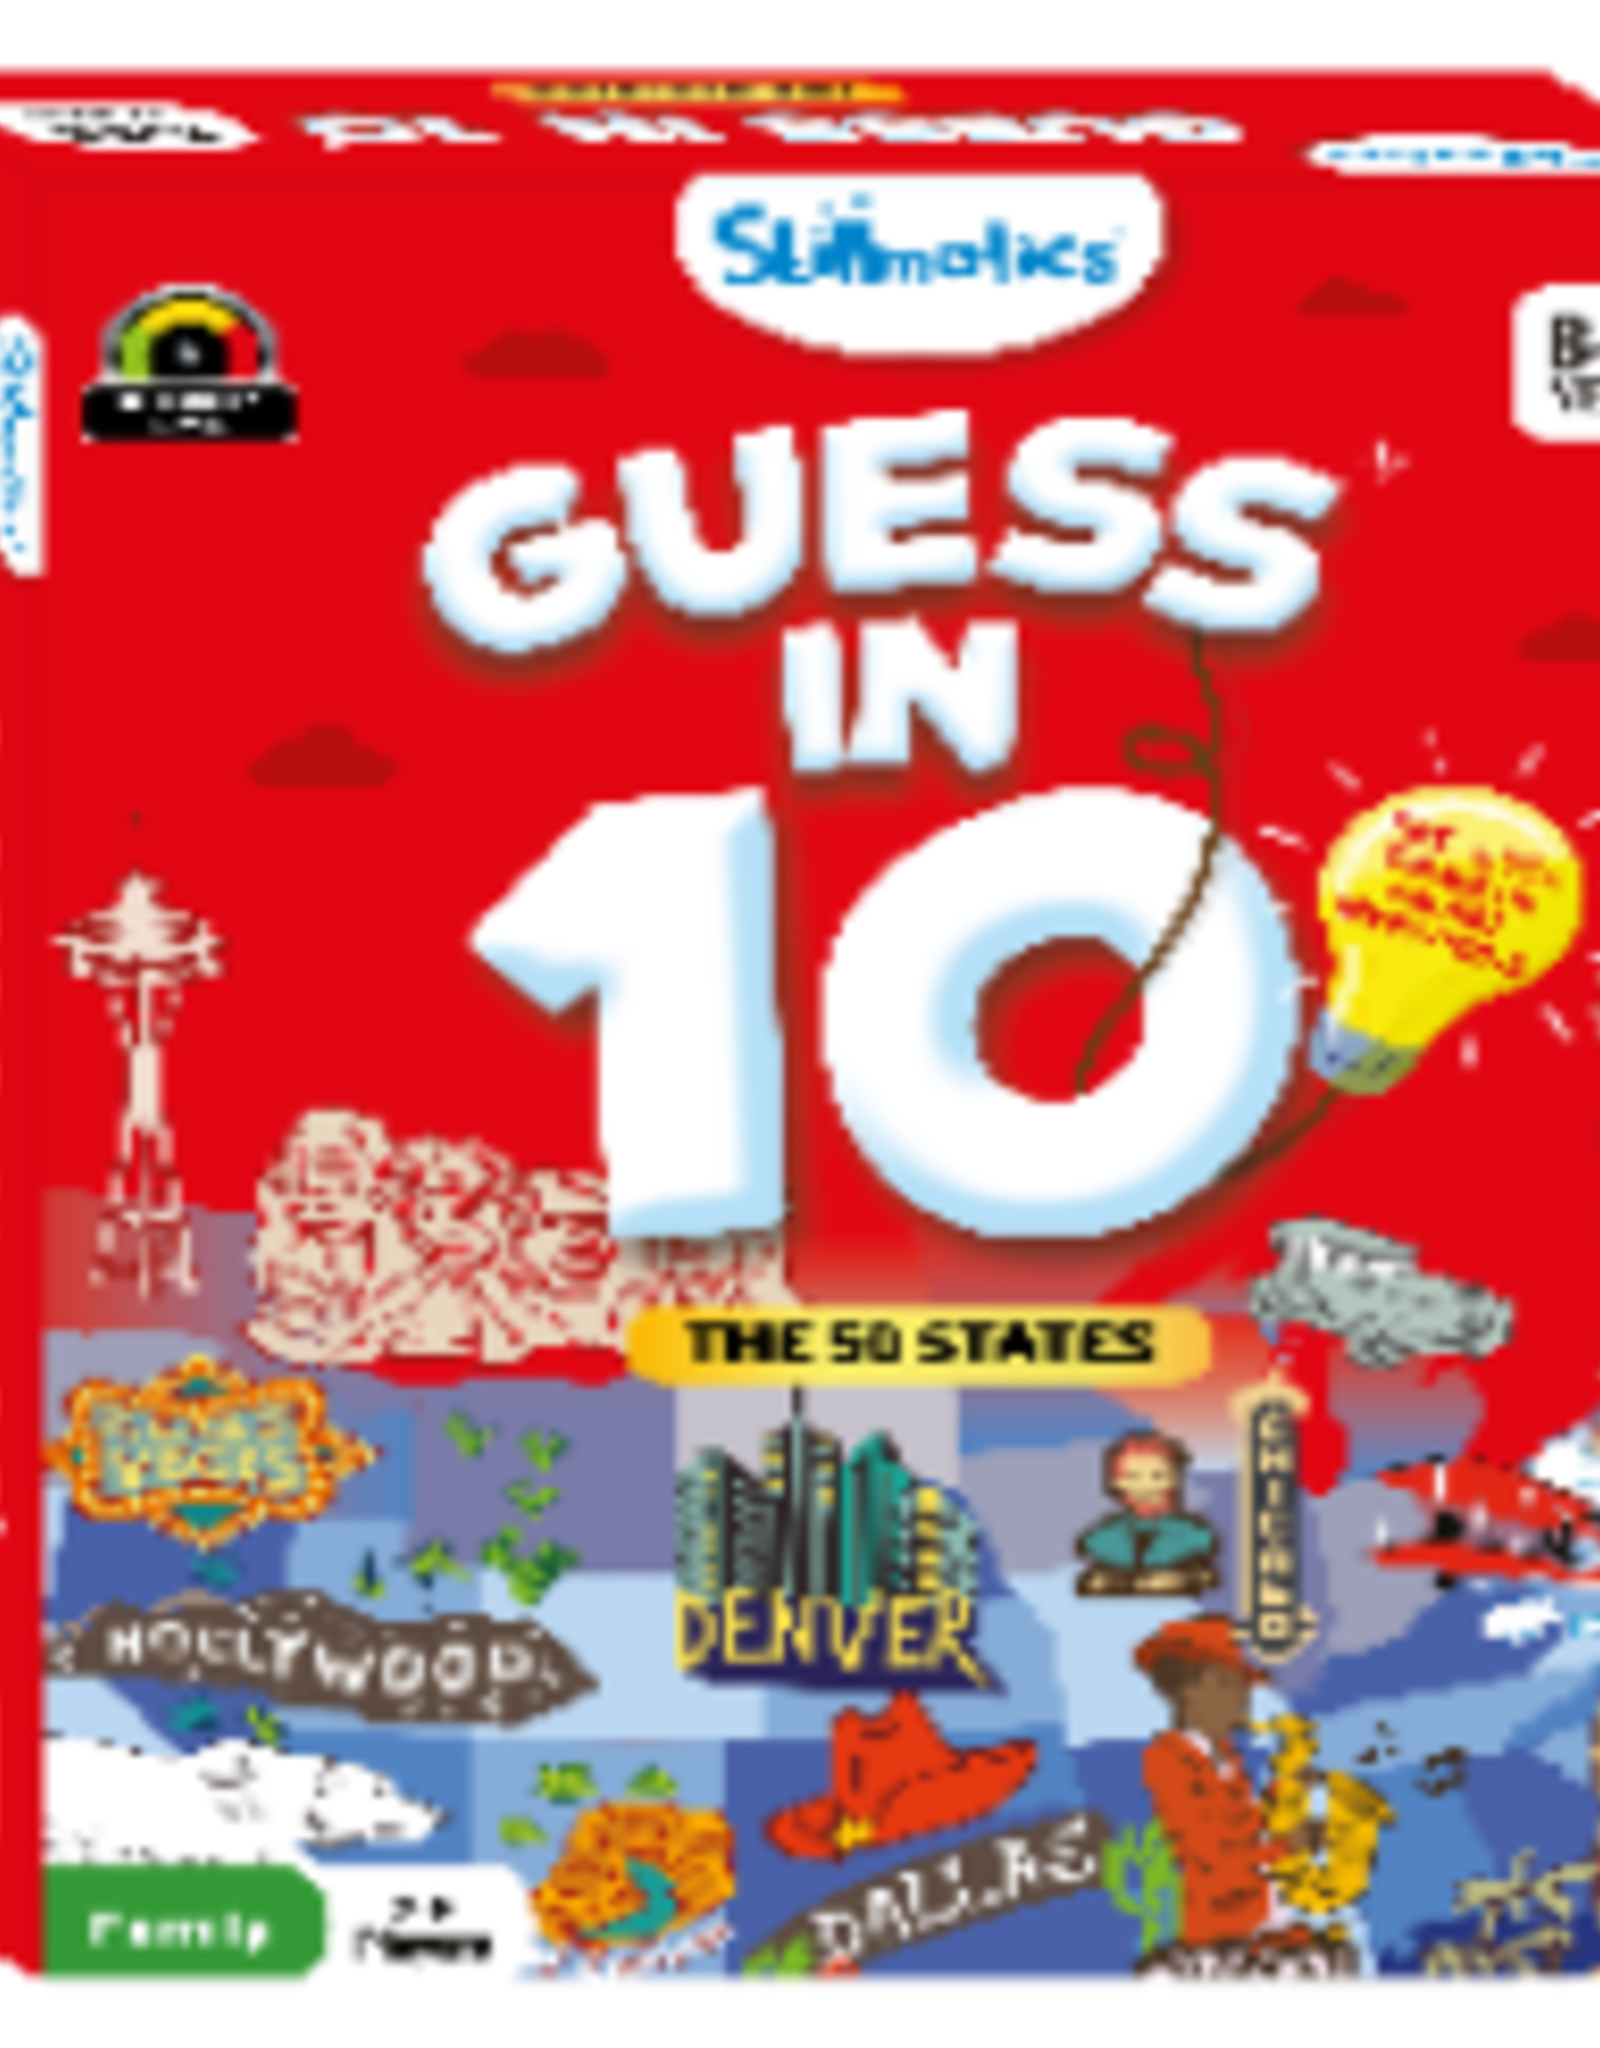 SKILLMATICS THE 50 STATES GUESS IN 10